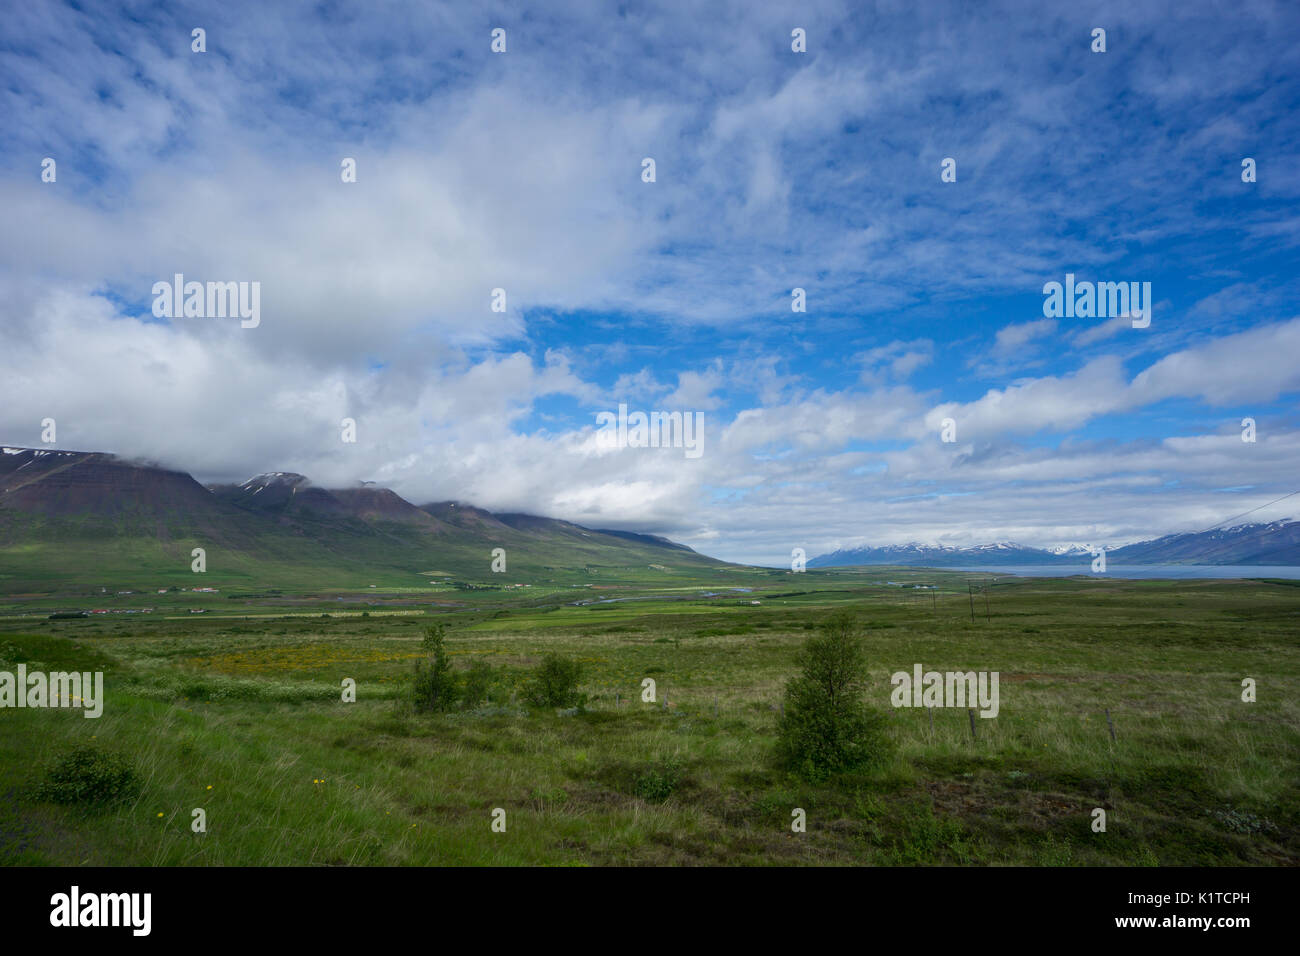 Iceland - Endless green landscape with snow covered mountains Stock Photo